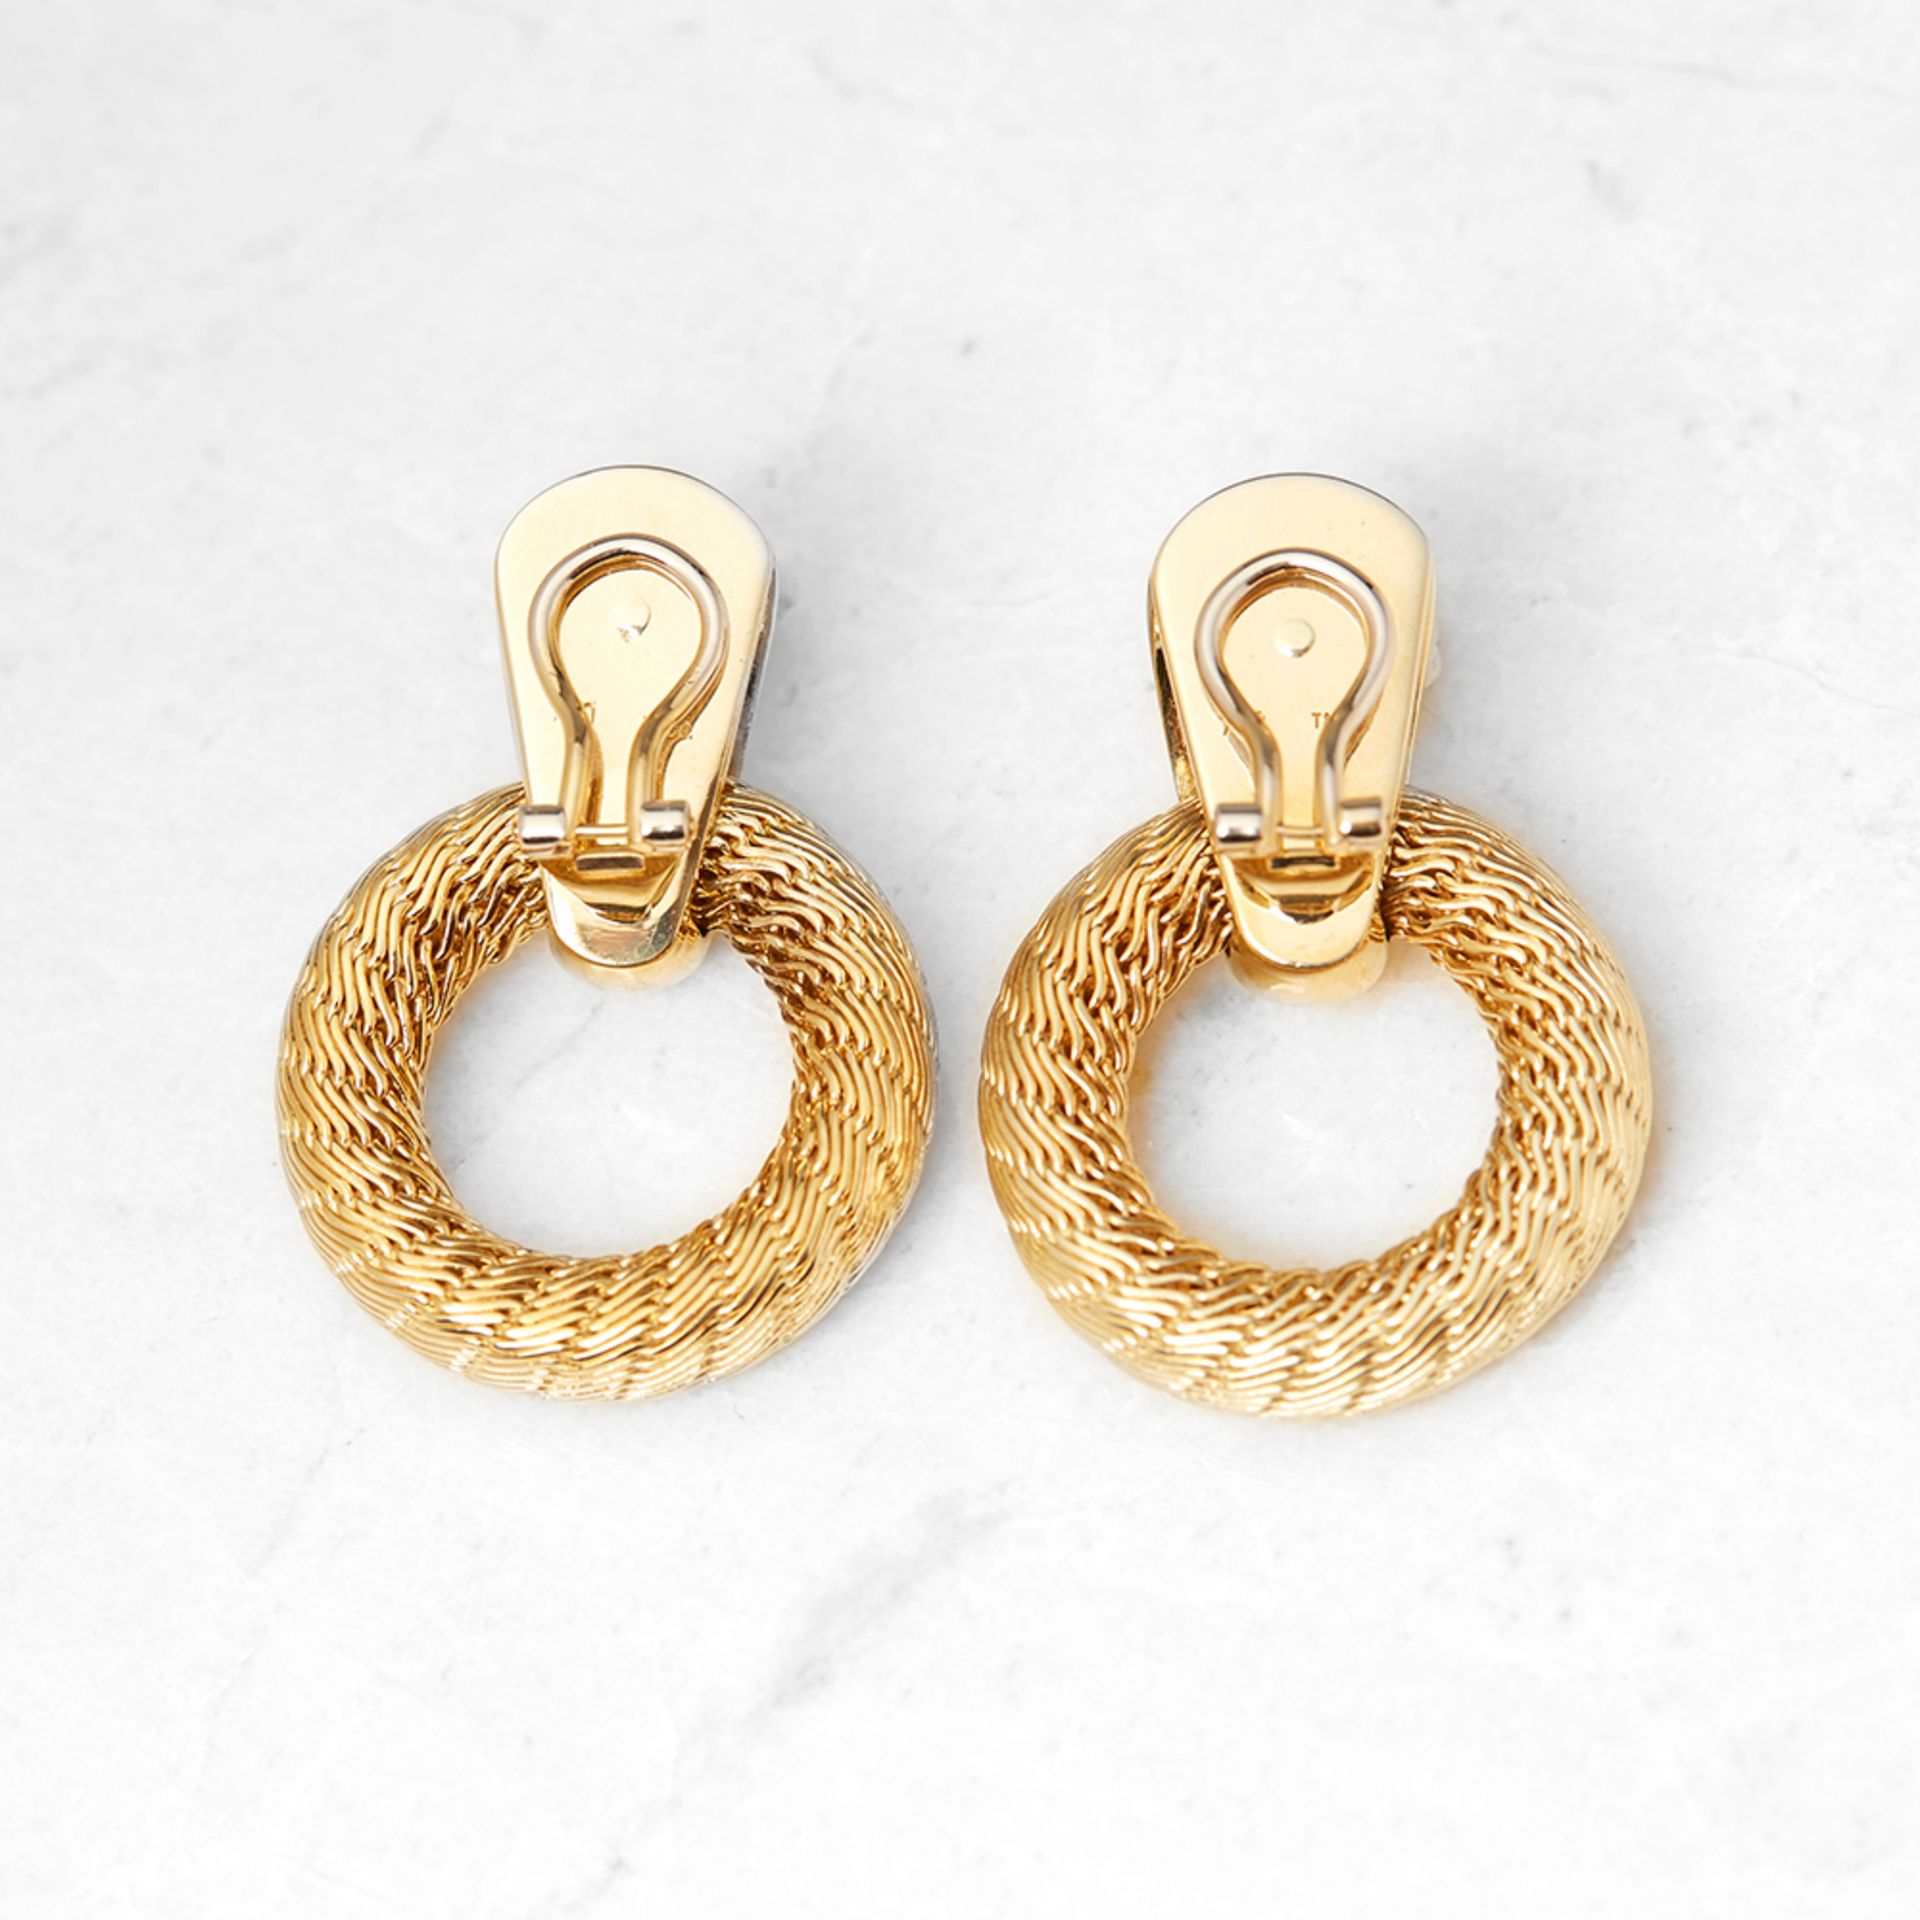 Tiffany & Co. 18k Yellow Gold Woven Hoop Design Clip-On Earrings - Image 5 of 5